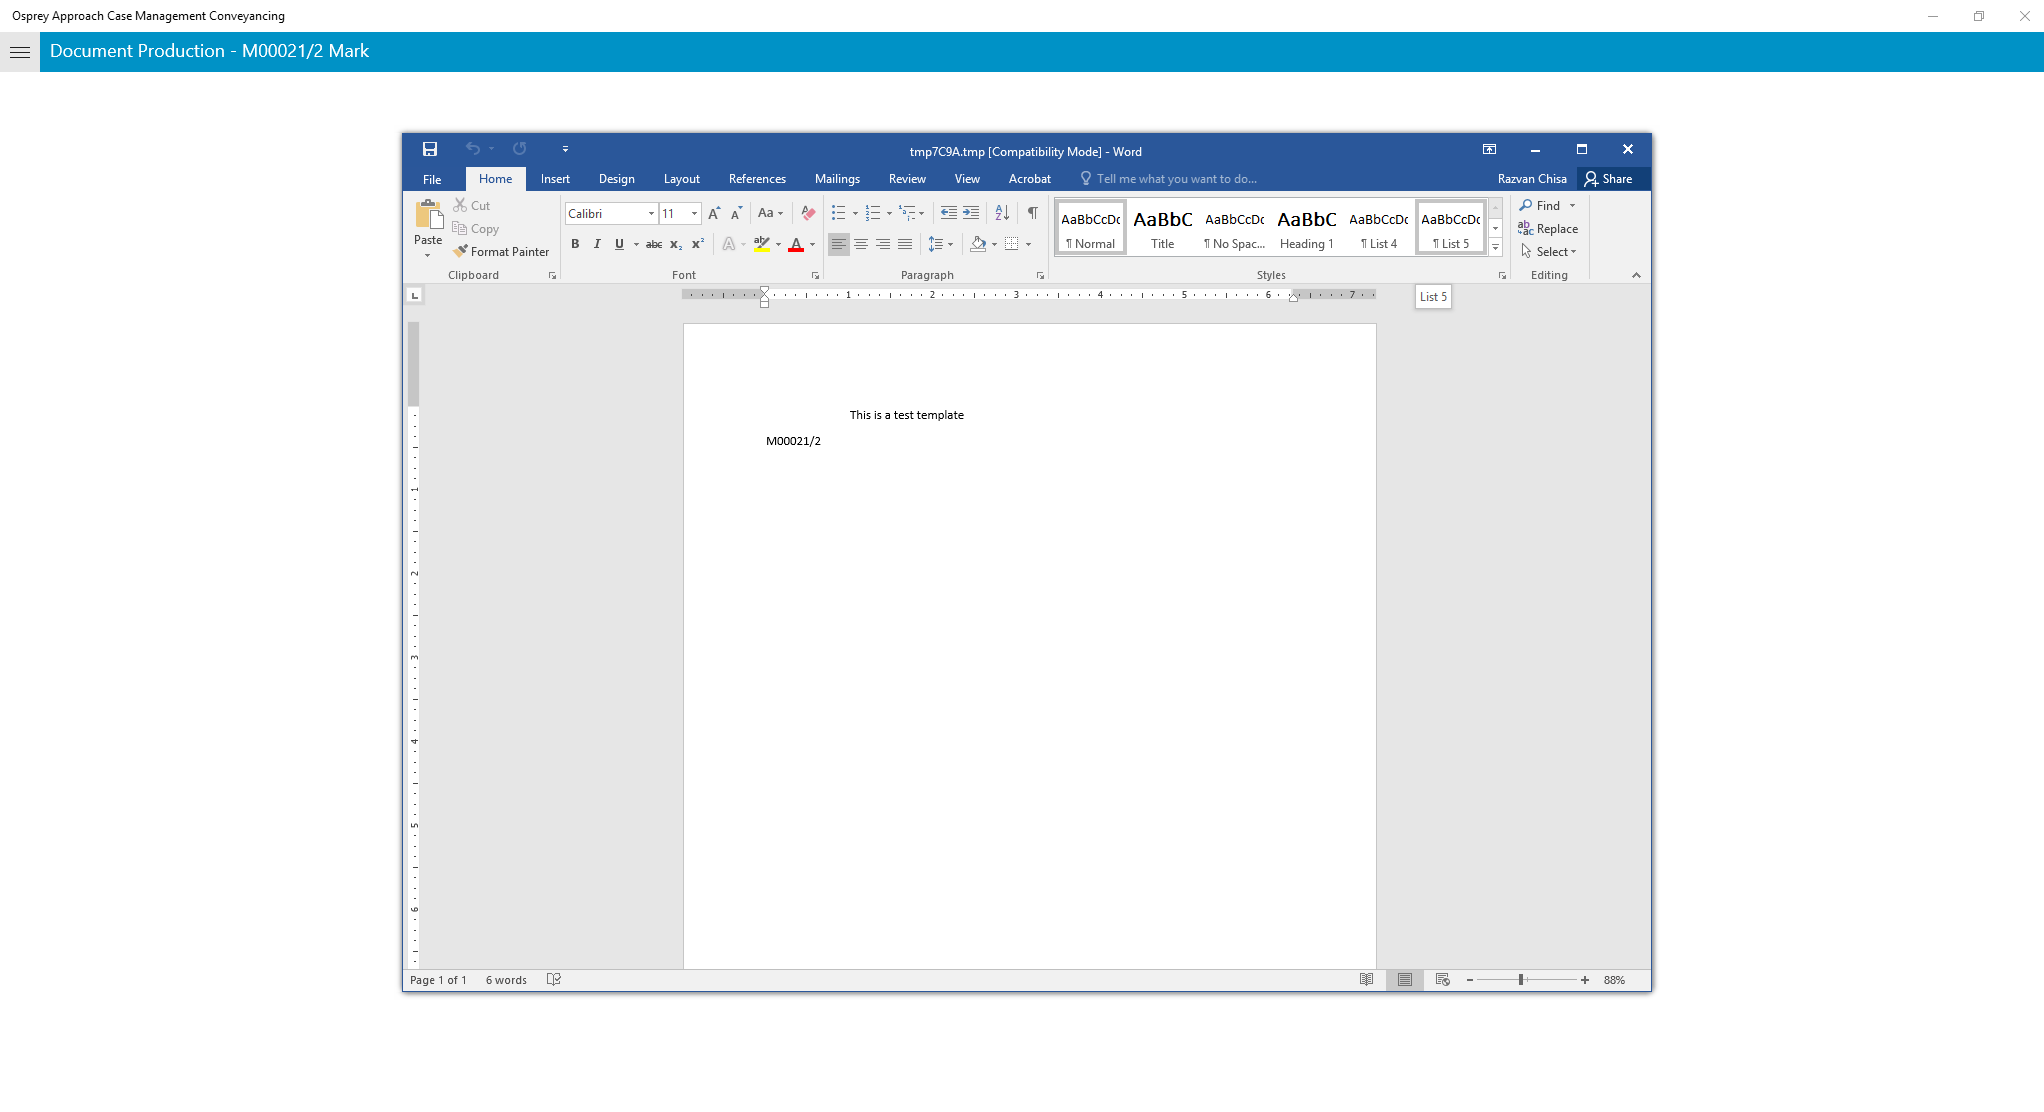 Document production with Microsoft Word